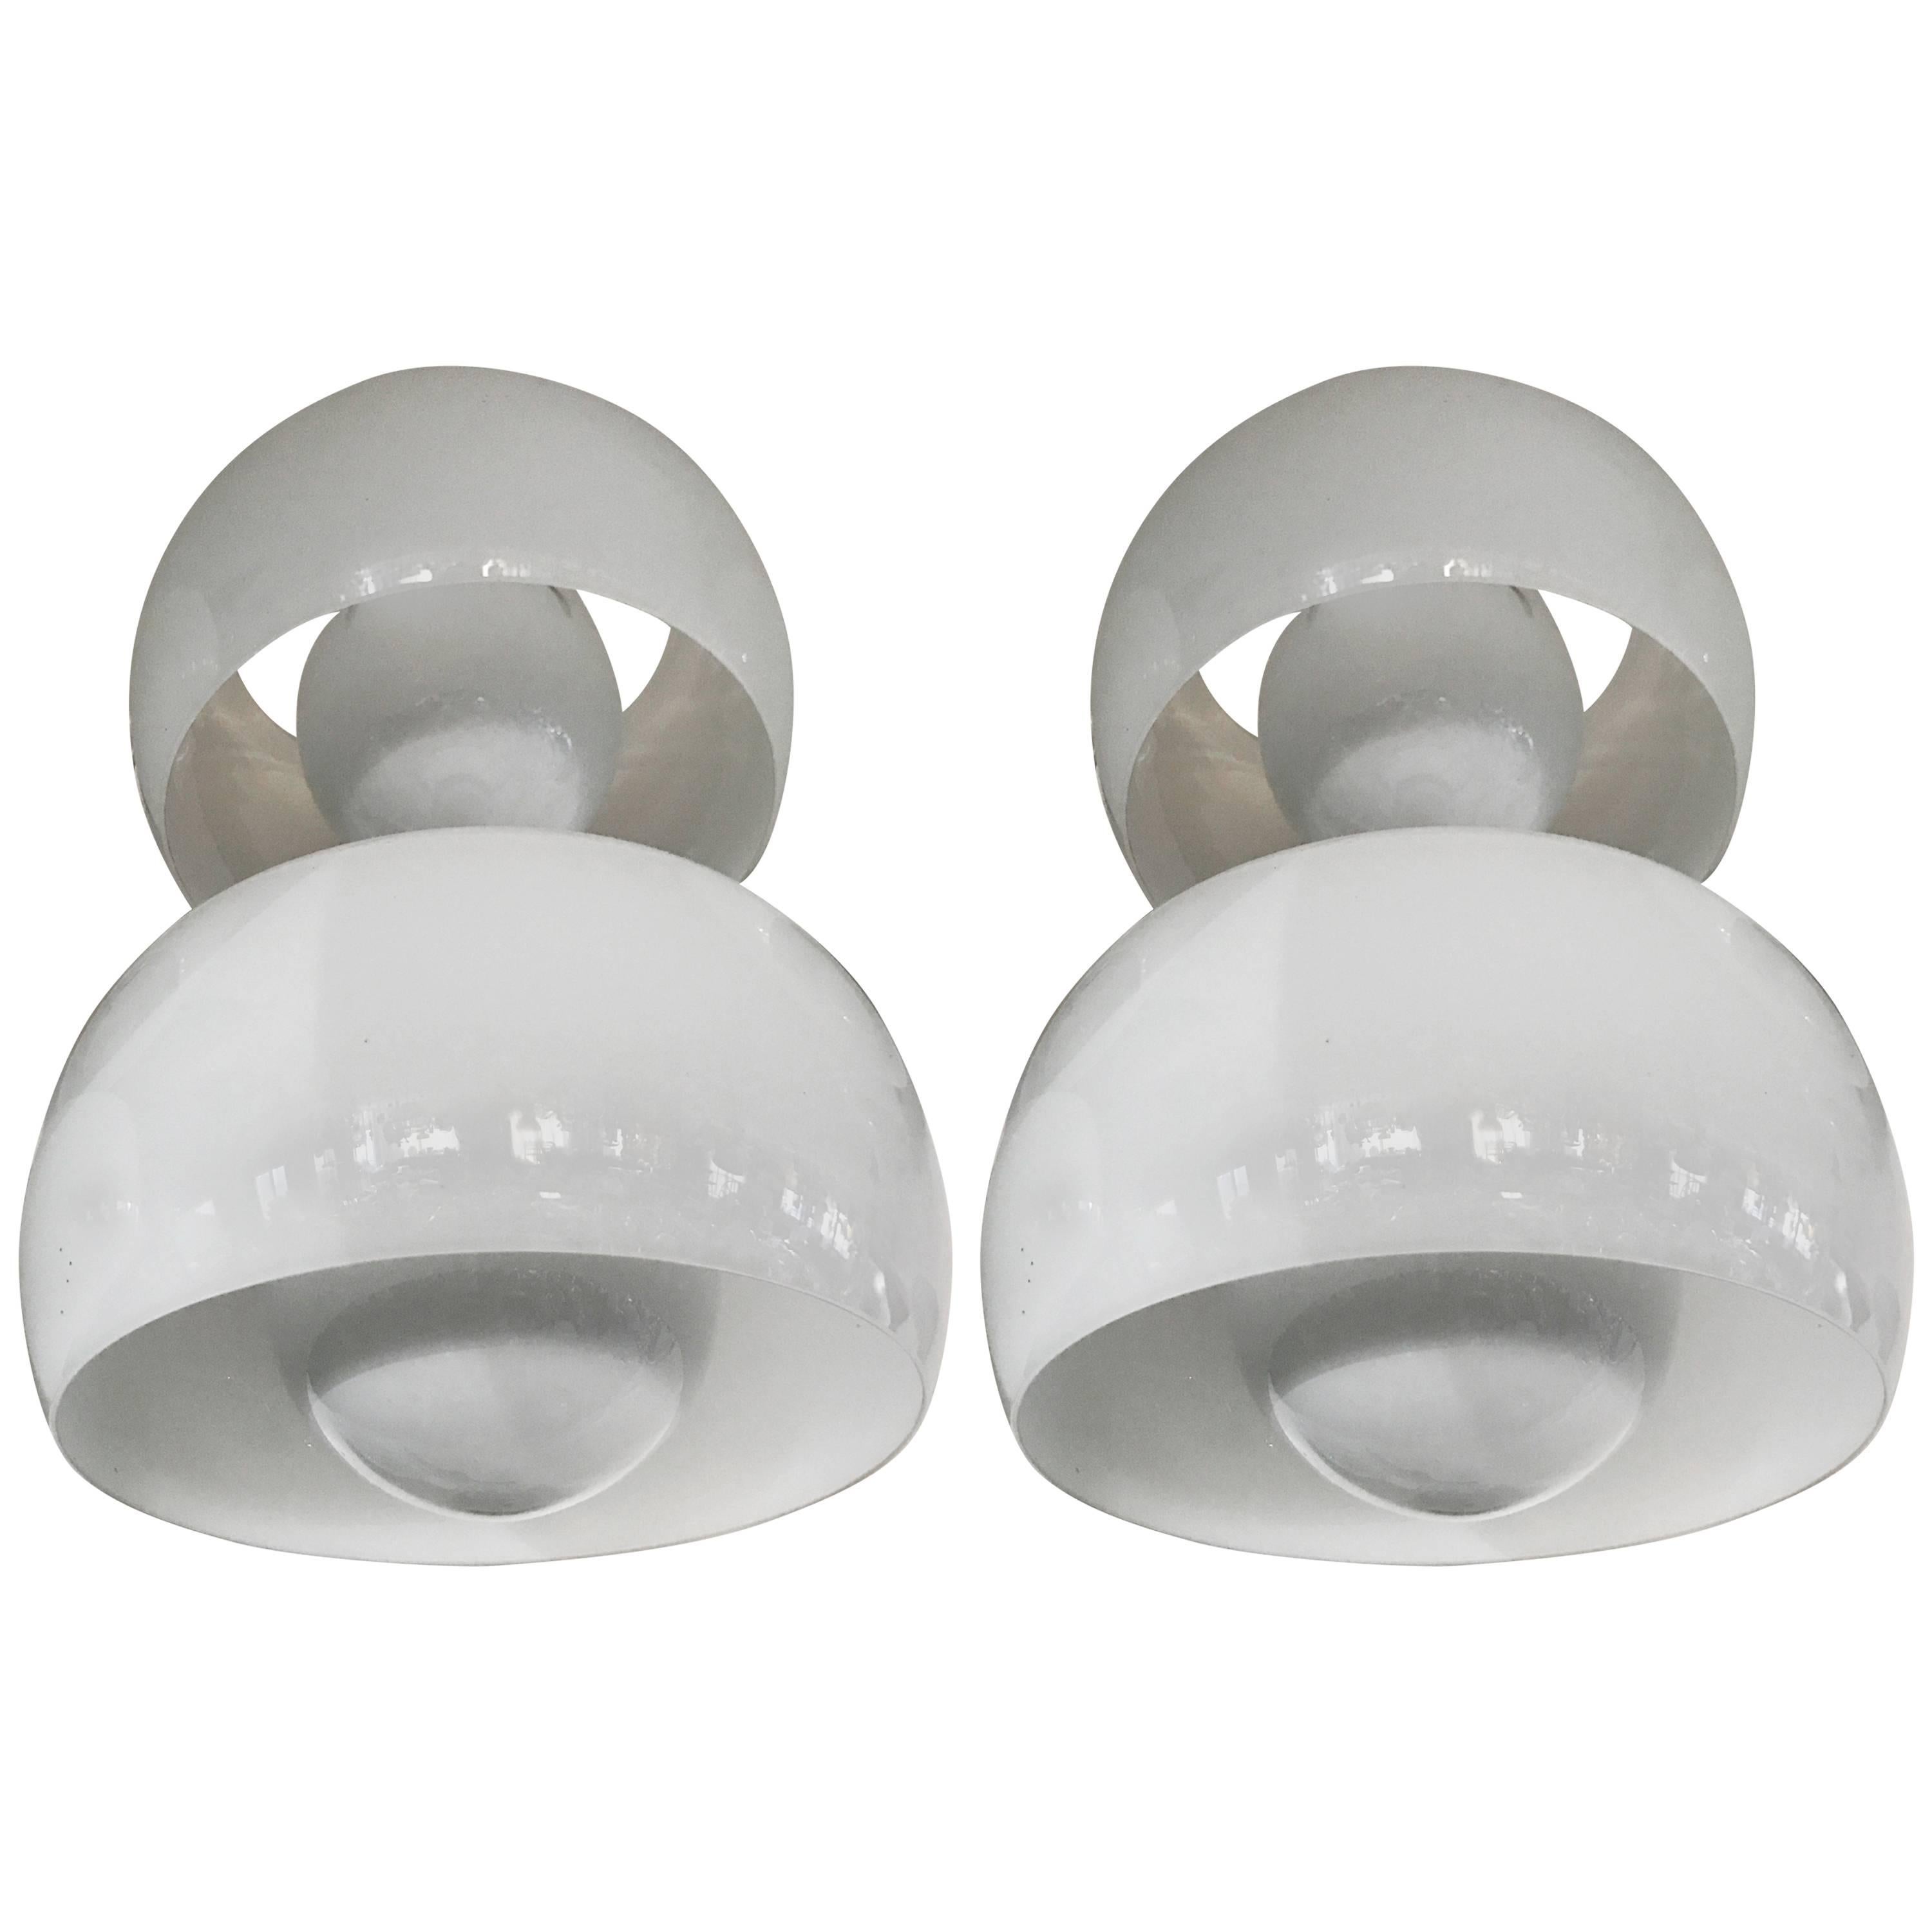 Pair of Mid-Century Modern Omega Wall Lights by Vico Magistretti for Artemide